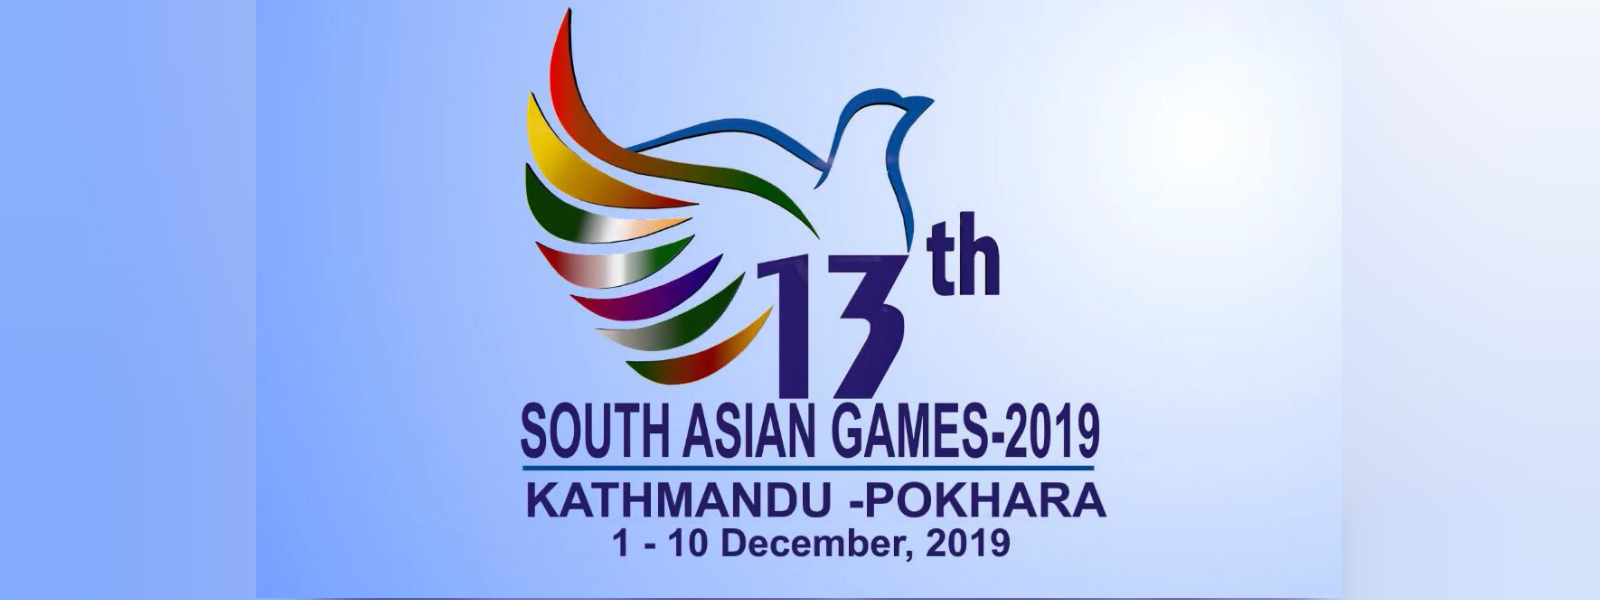 South Asian Games conclude